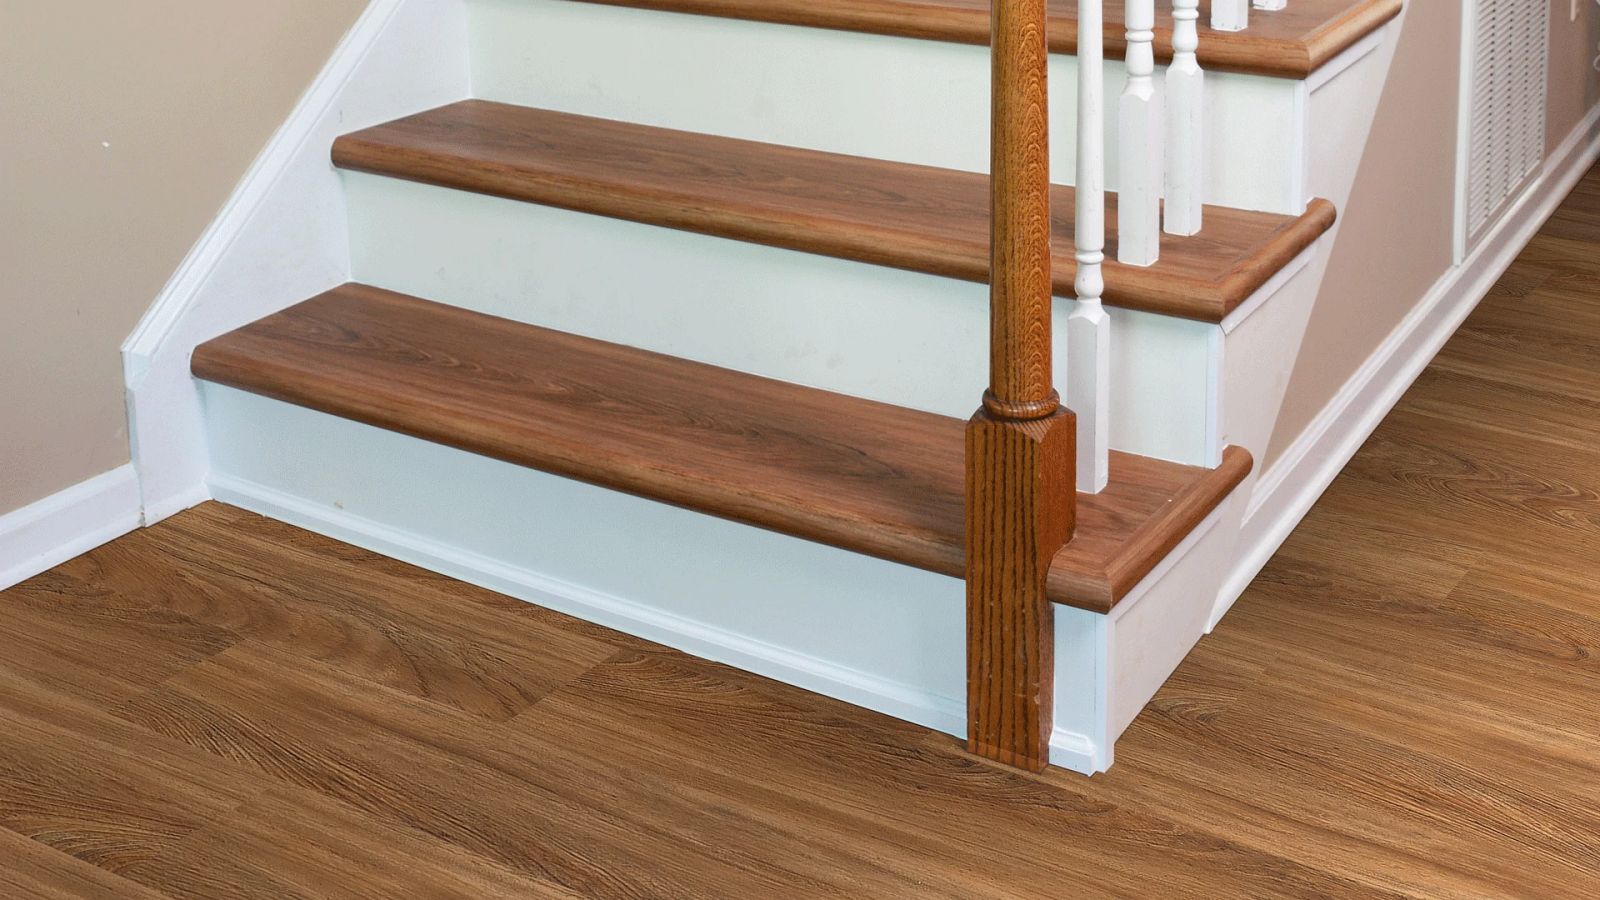 Shaw Floors, Can You Put Vinyl Sheet Flooring On Stairs